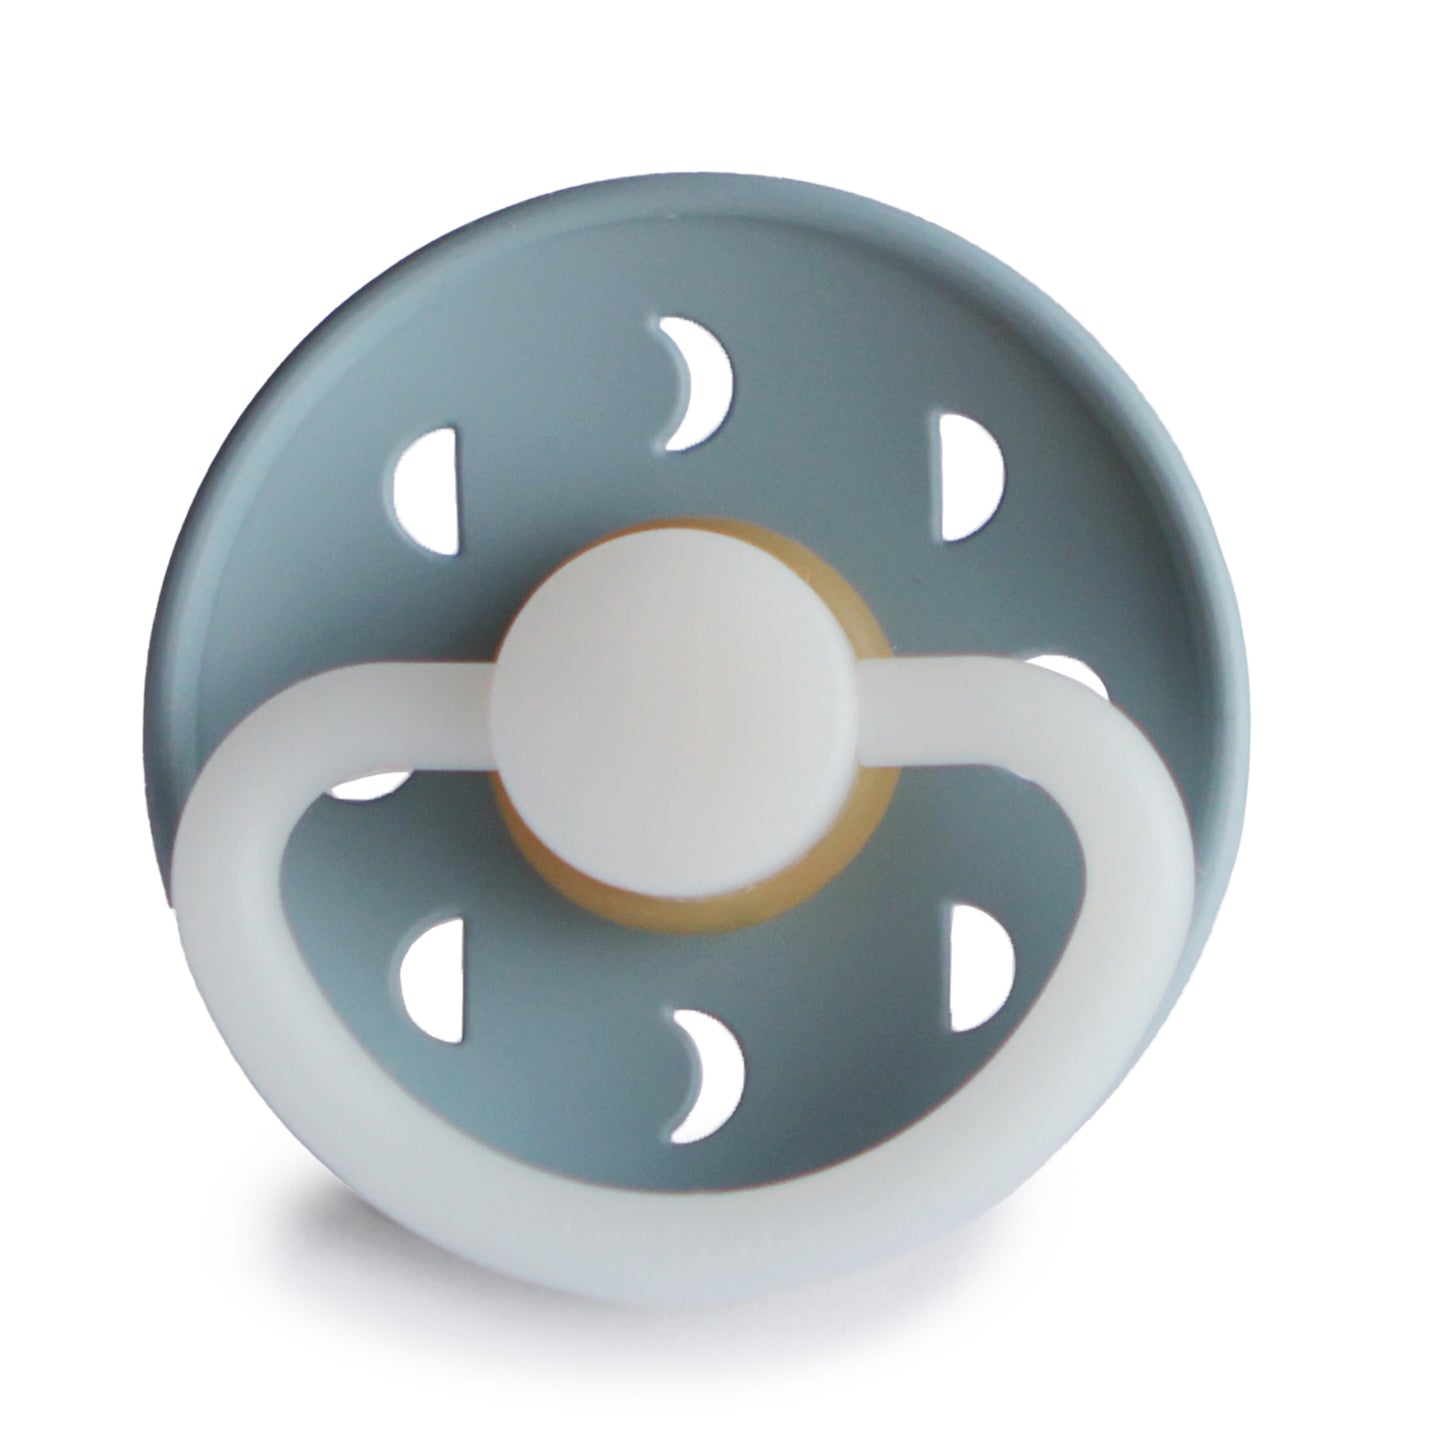 Frigg pacifier - FRIGG Moon Phase and Moon Phase Night - Size 1